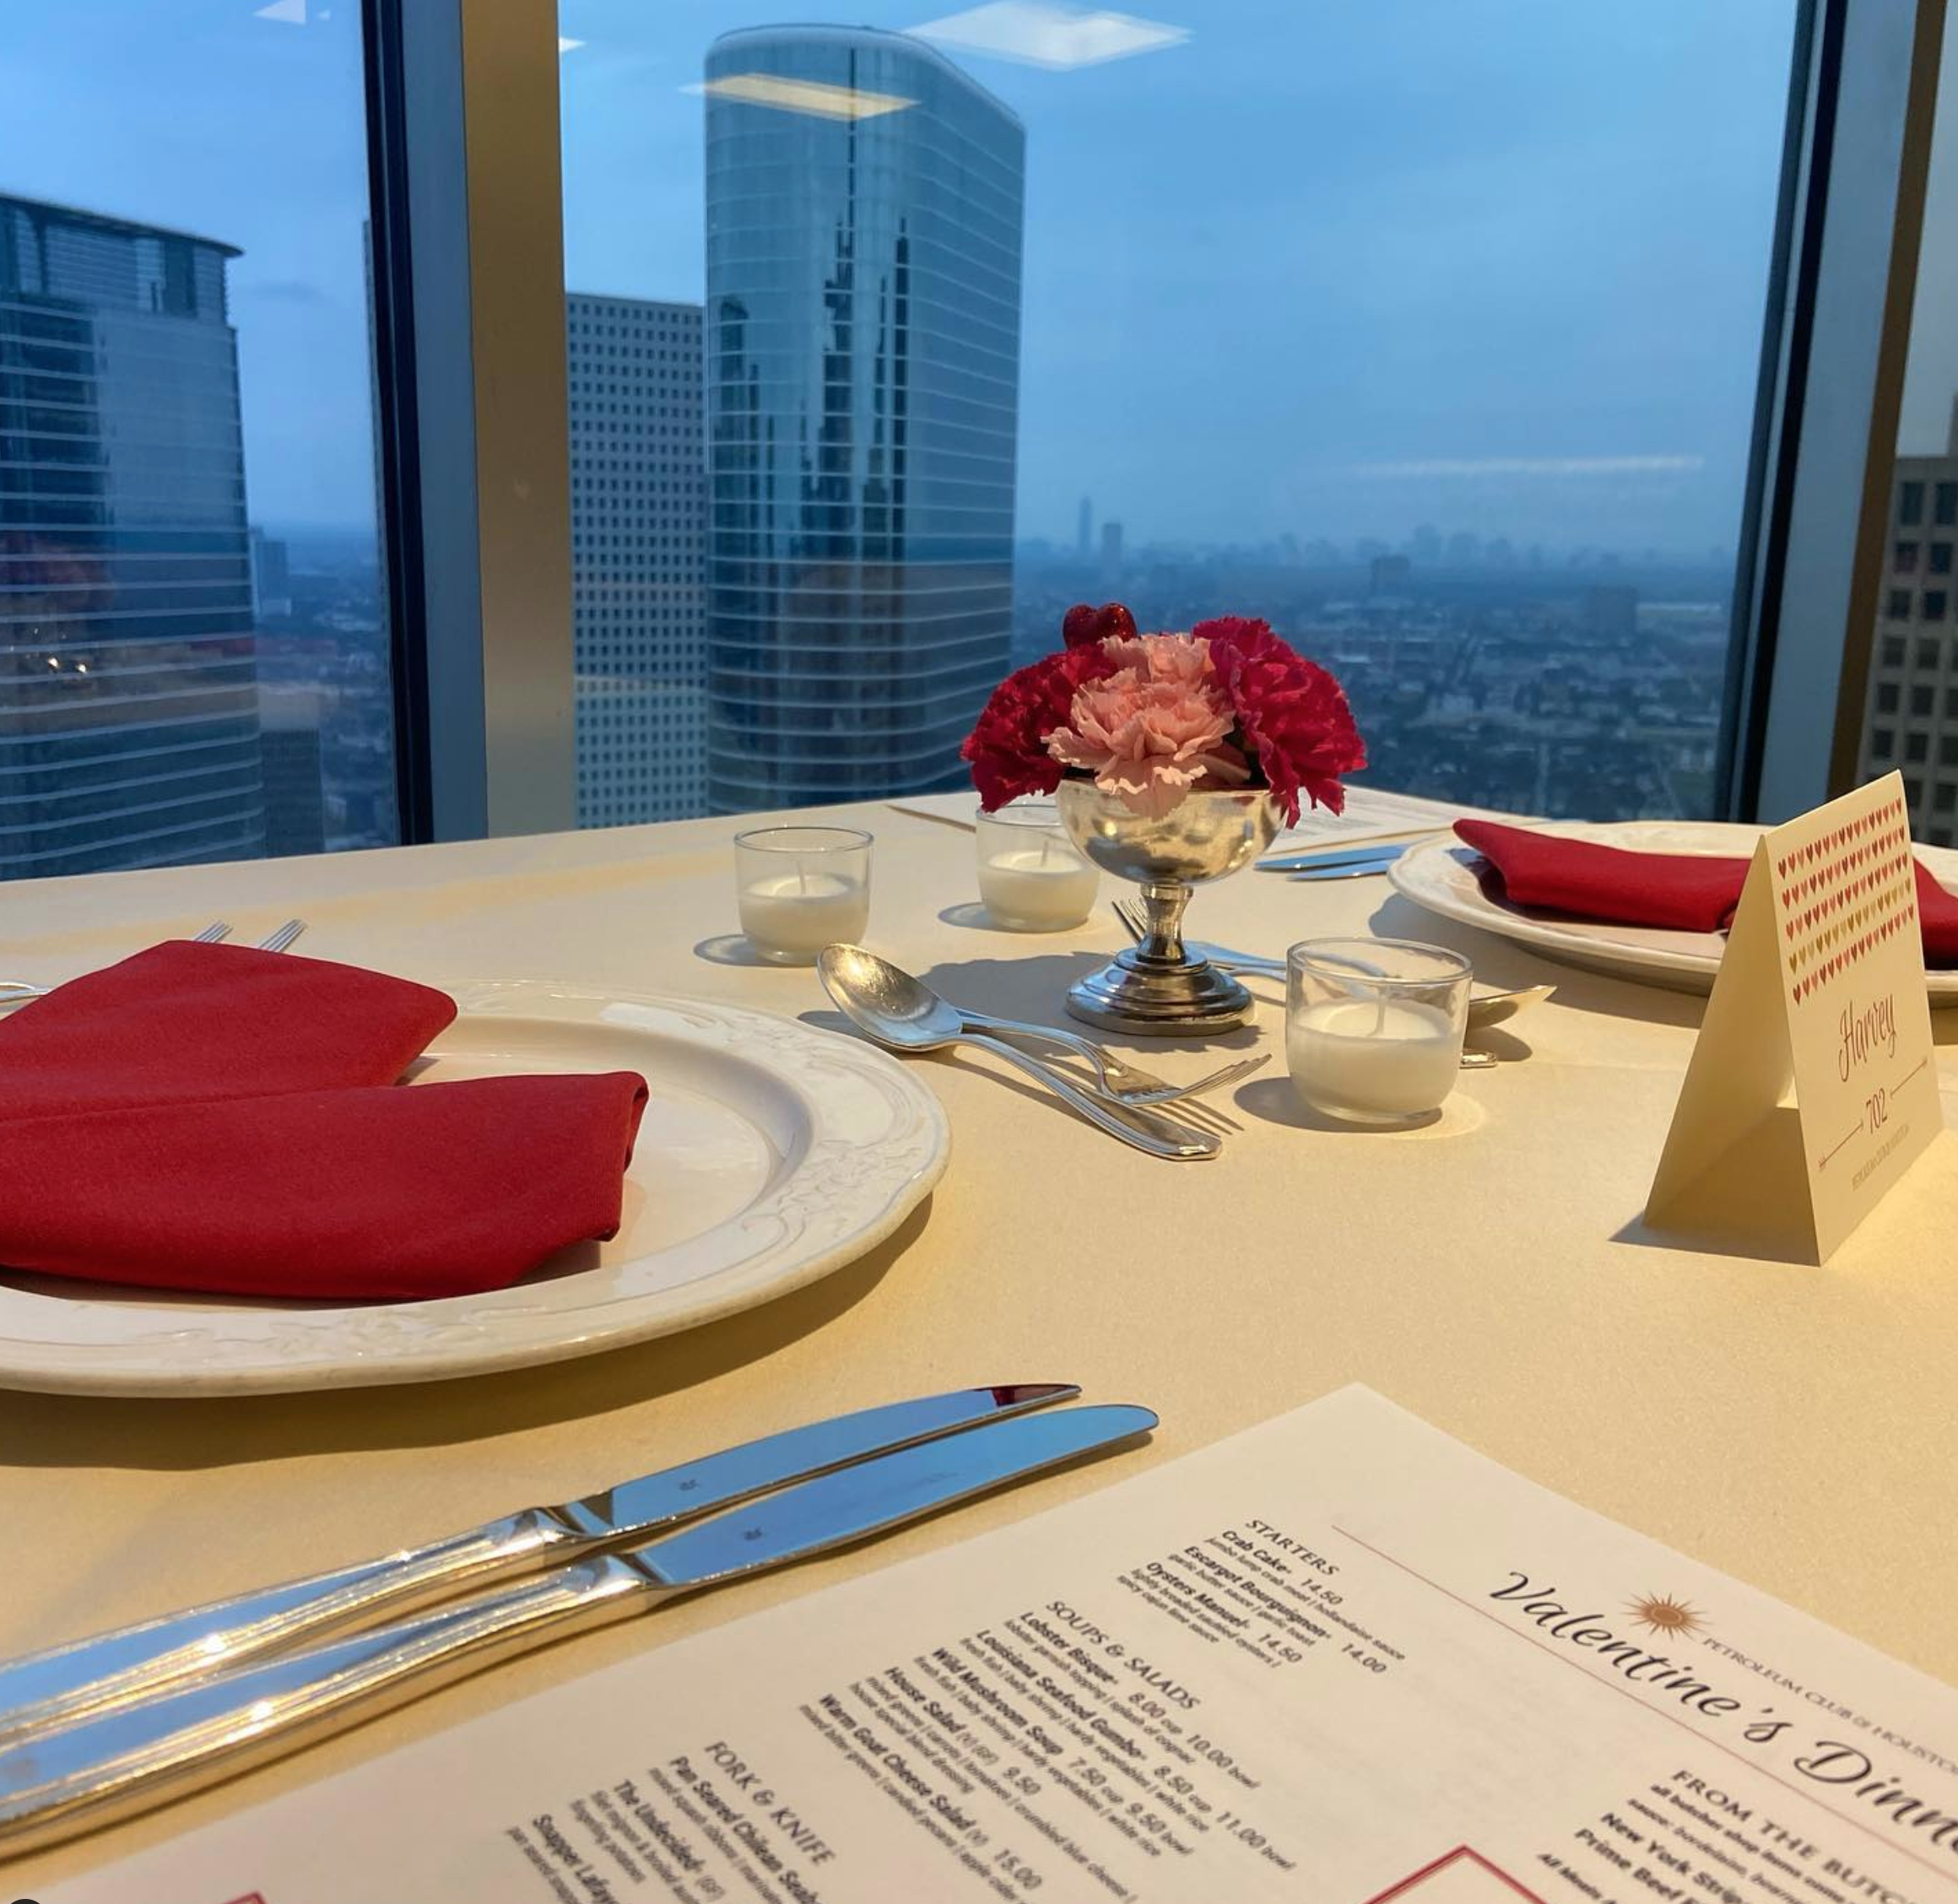 A luxurious Valentine's Day dinner set-up at the Petroleum Club of Houston in Houston, TX. The table is overlooking the city.